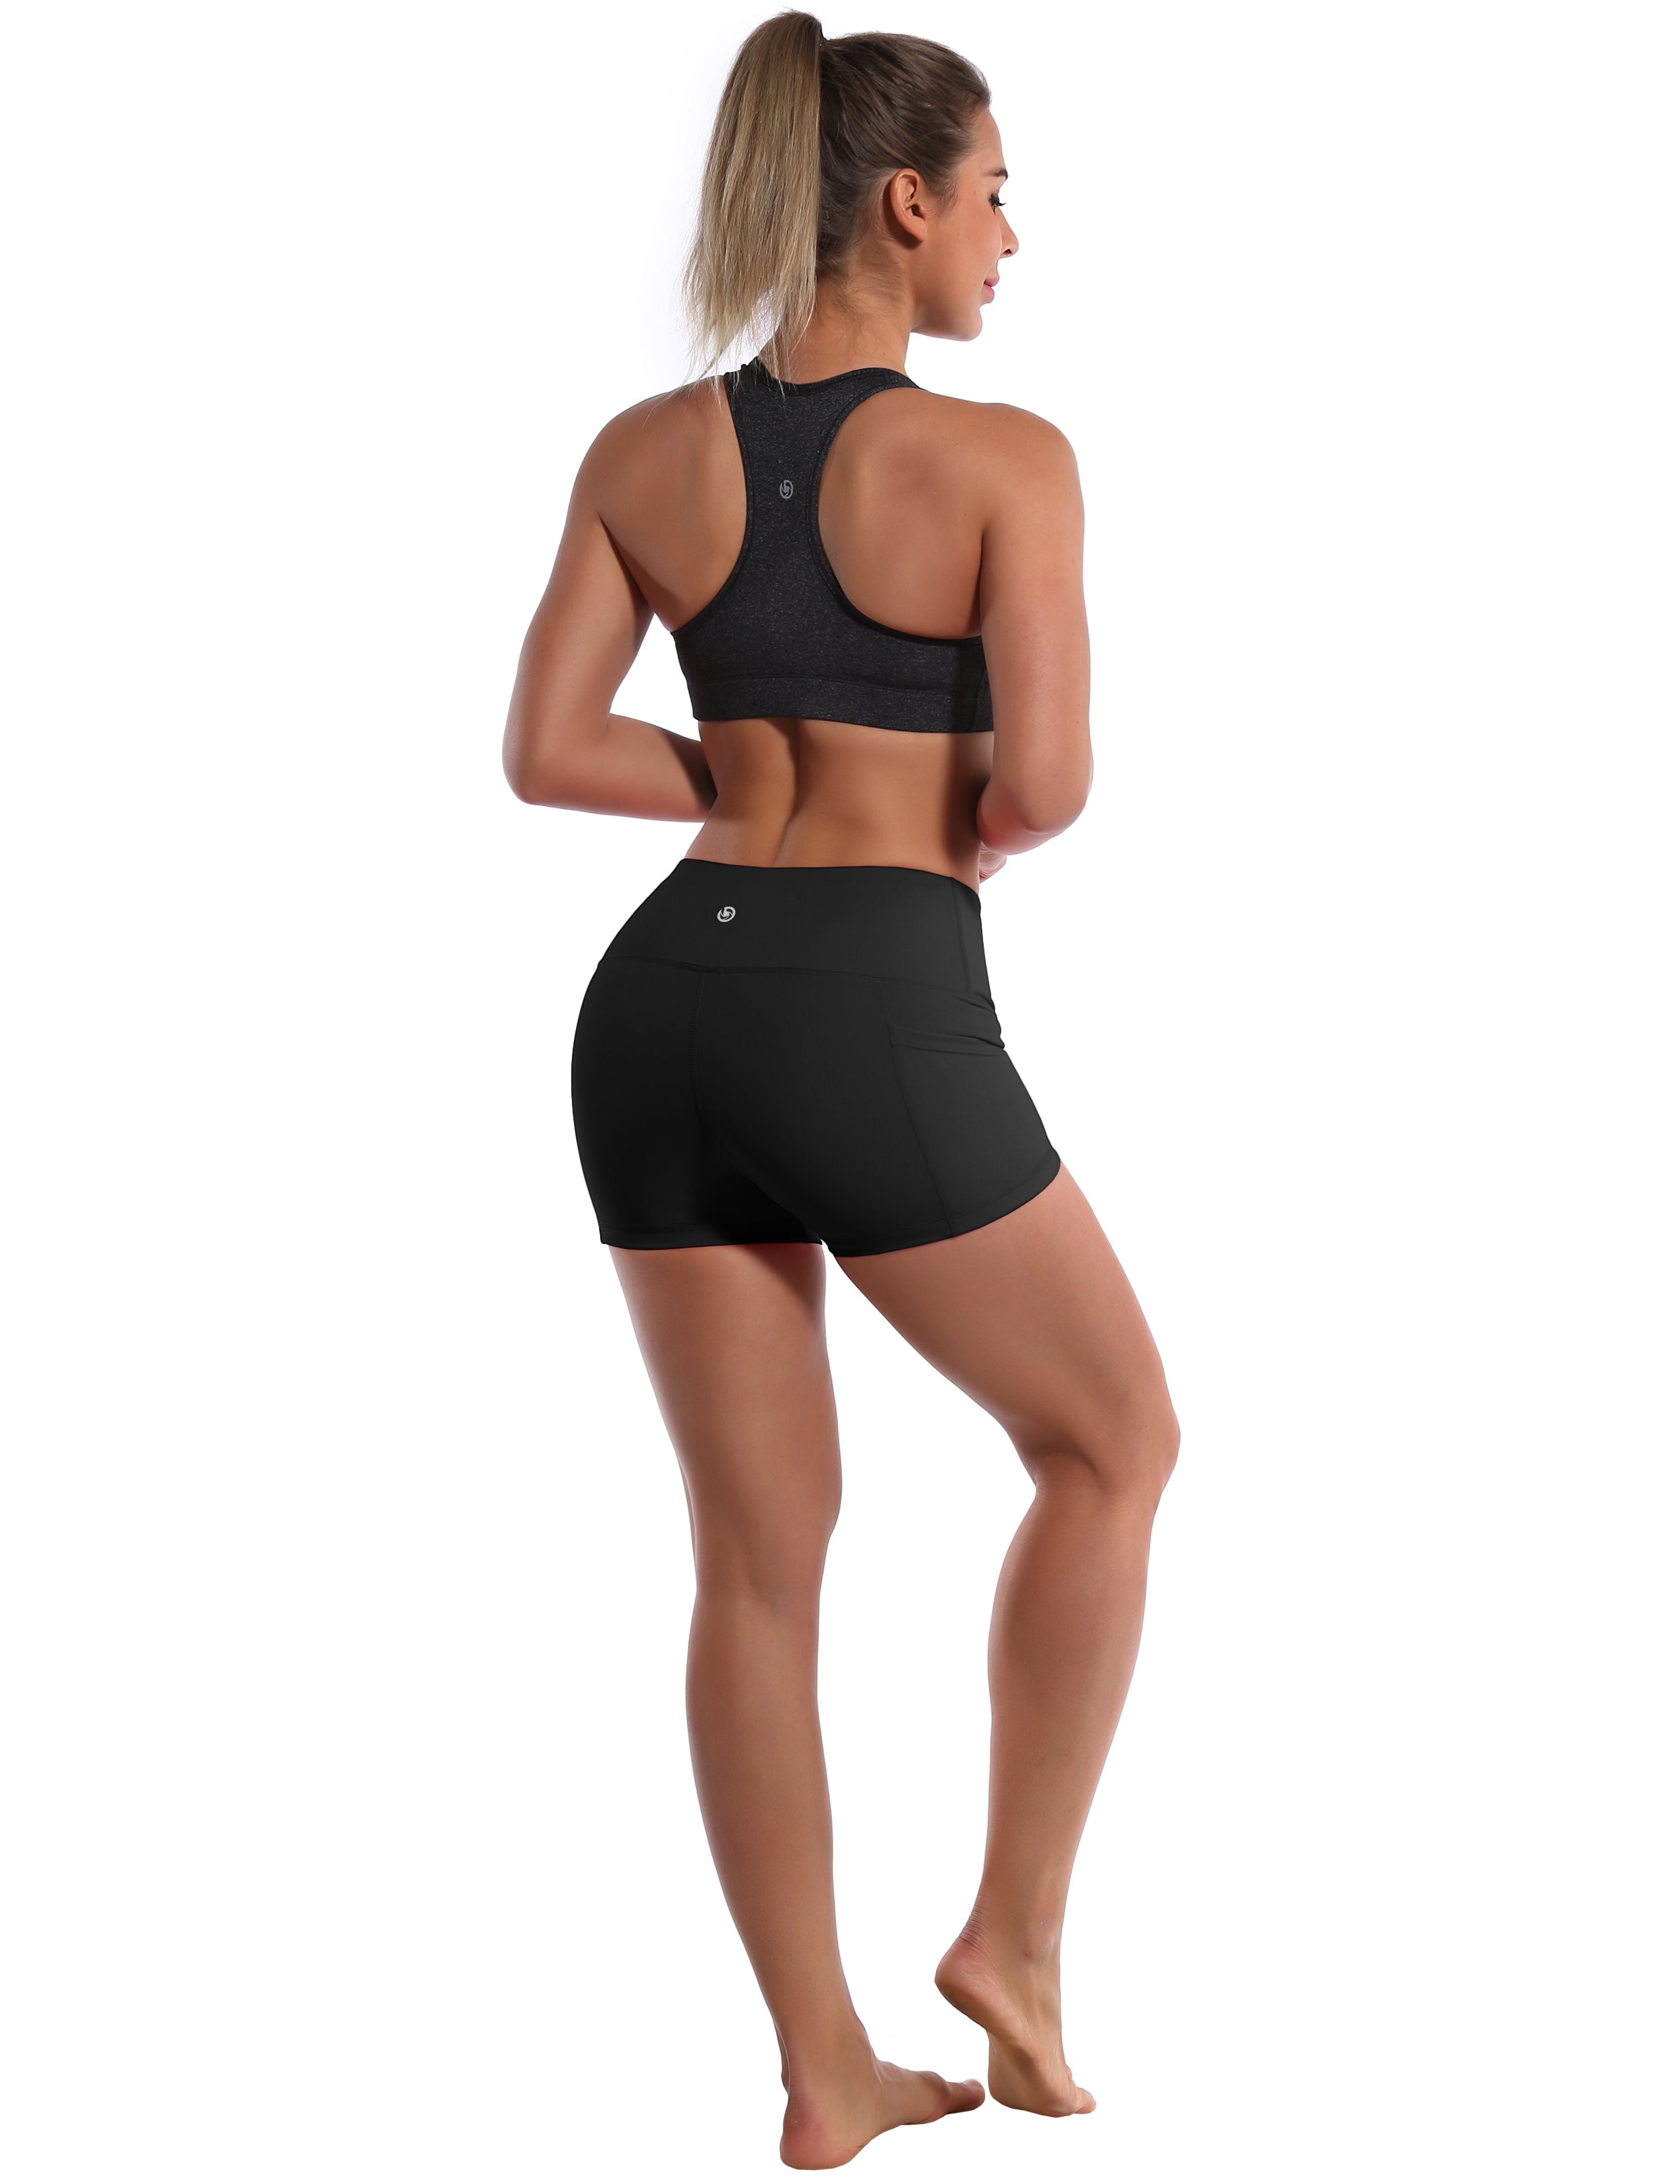 2.5" Side Pockets Gym Shorts black Sleek, soft, smooth and totally comfortable: our newest sexy style is here. Softest-ever fabric High elasticity High density 4-way stretch Fabric doesn't attract lint easily No see-through Moisture-wicking Machine wash 78% Polyester, 22% Spandex